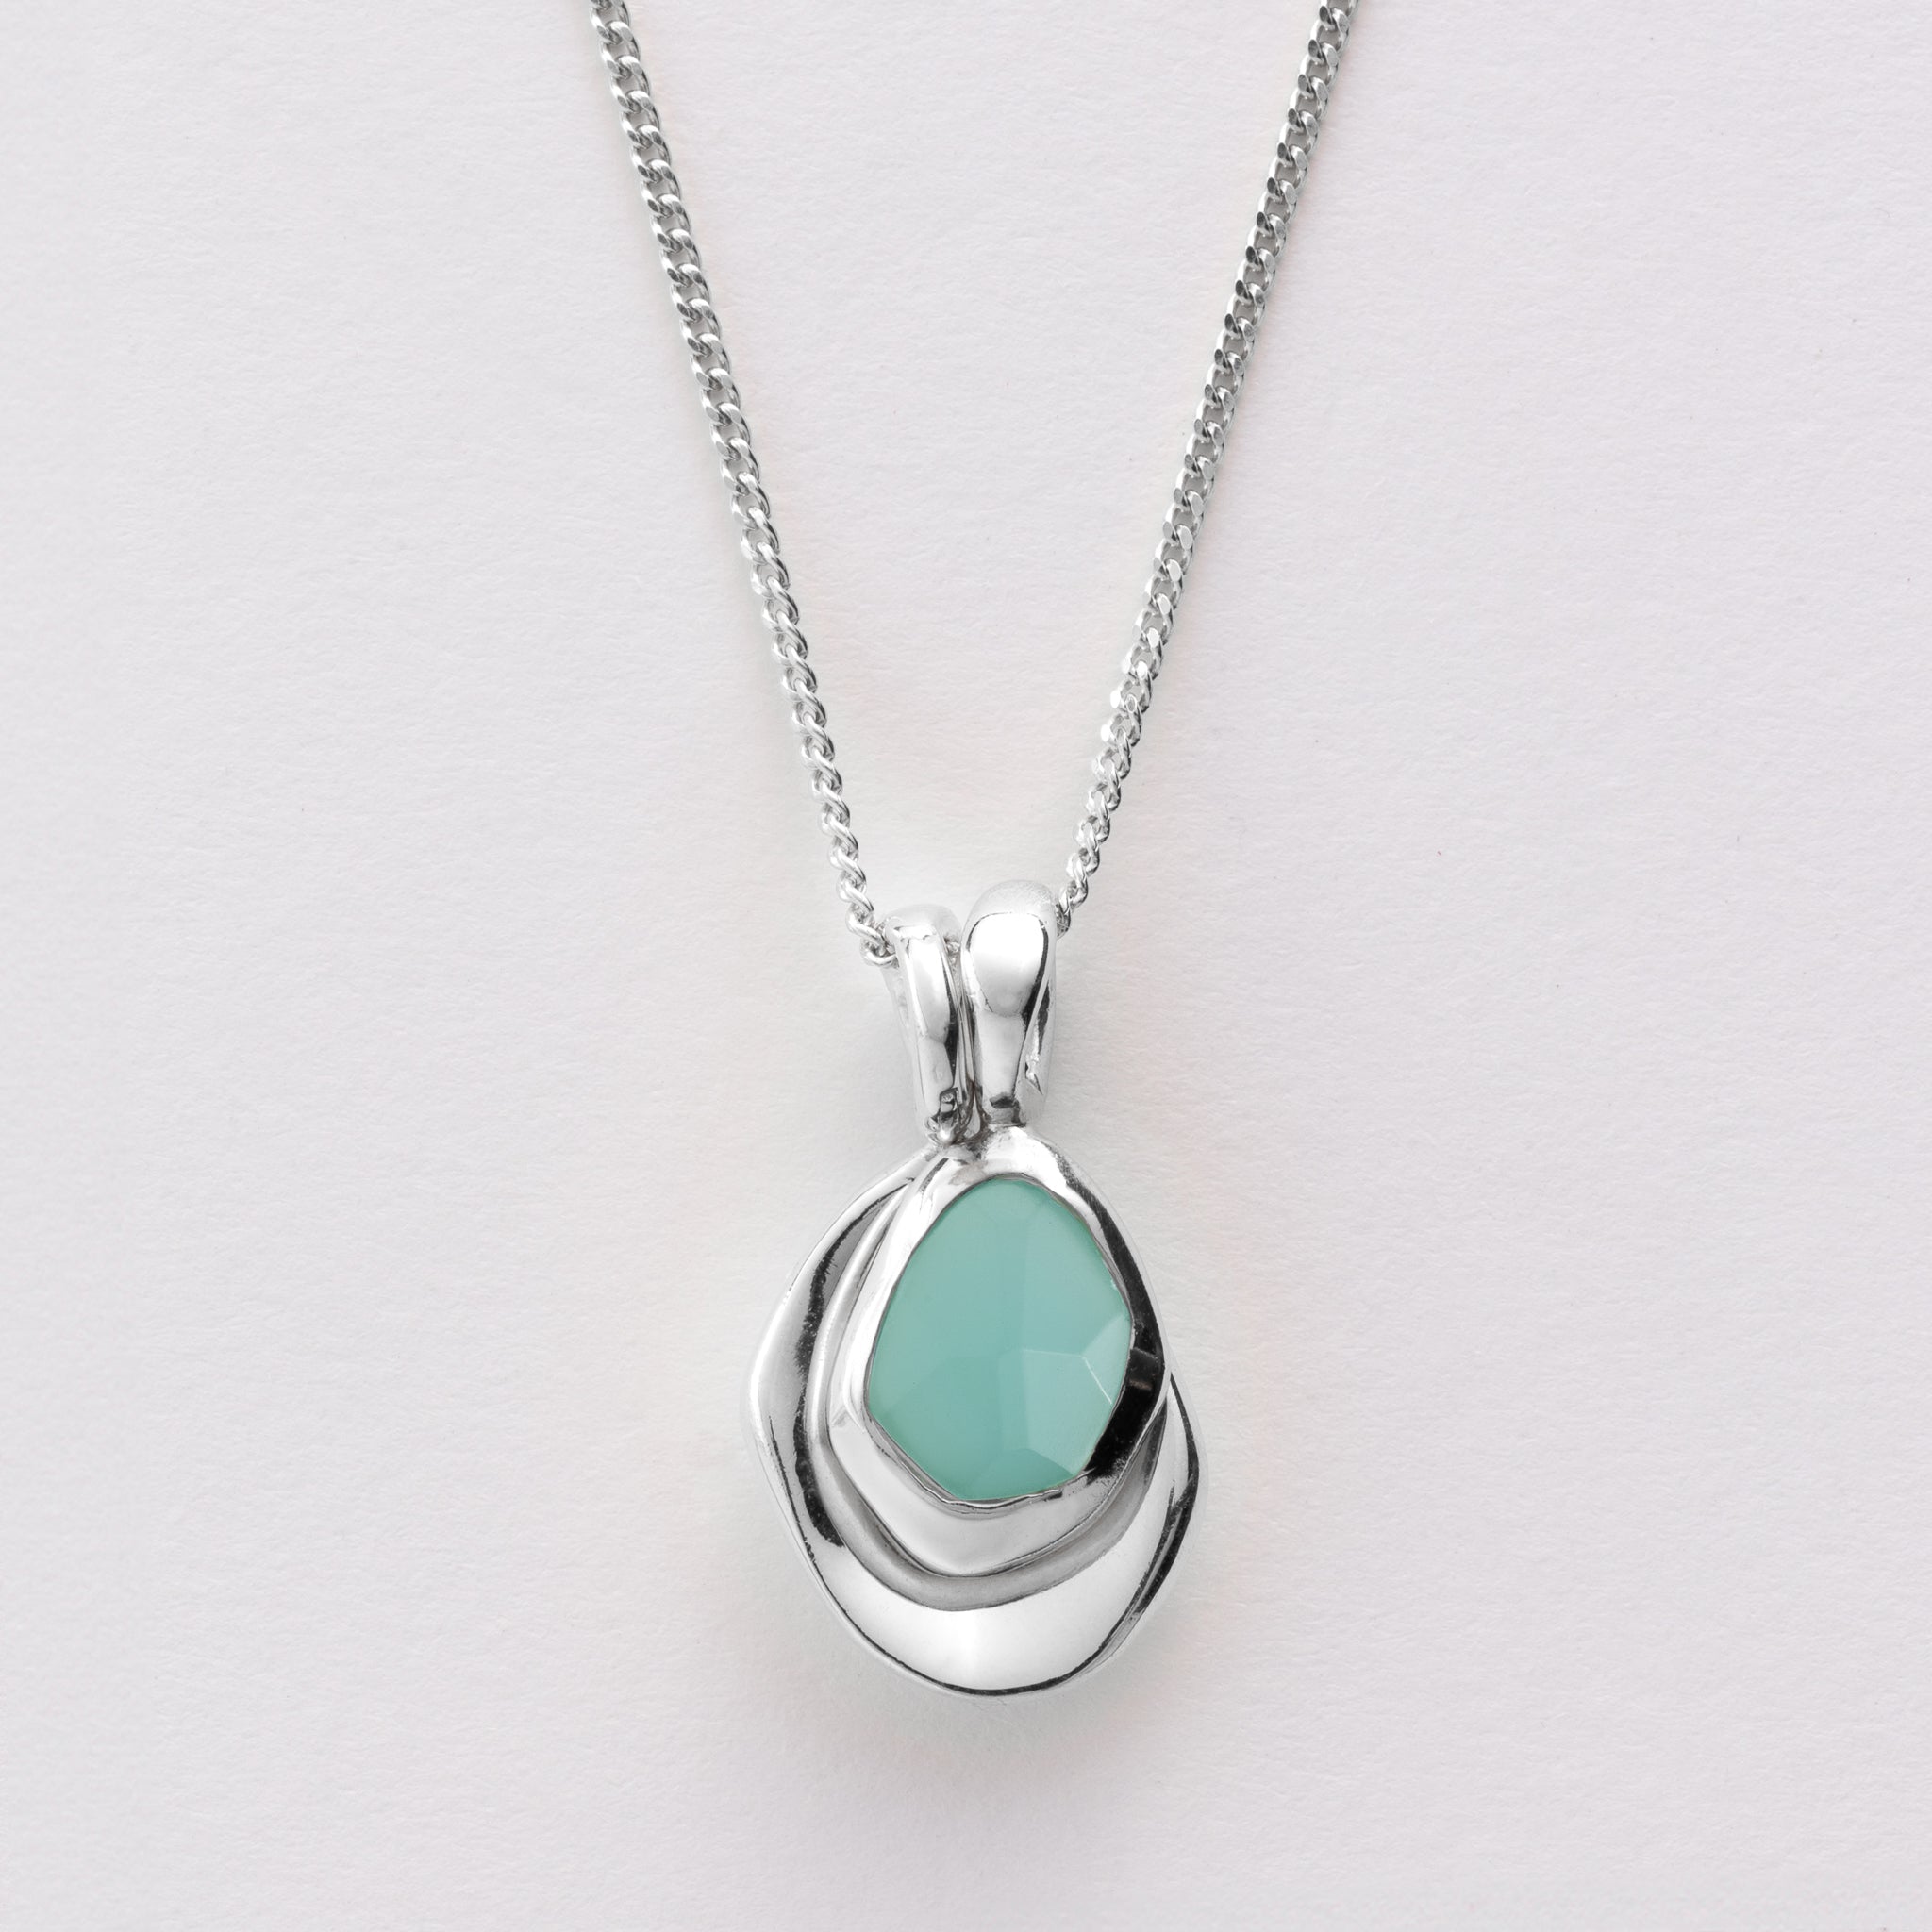 Pebble Charms necklace features a smooth, polished Pebble charm, nestled alongside a sparkling handcut Gemstone charm.